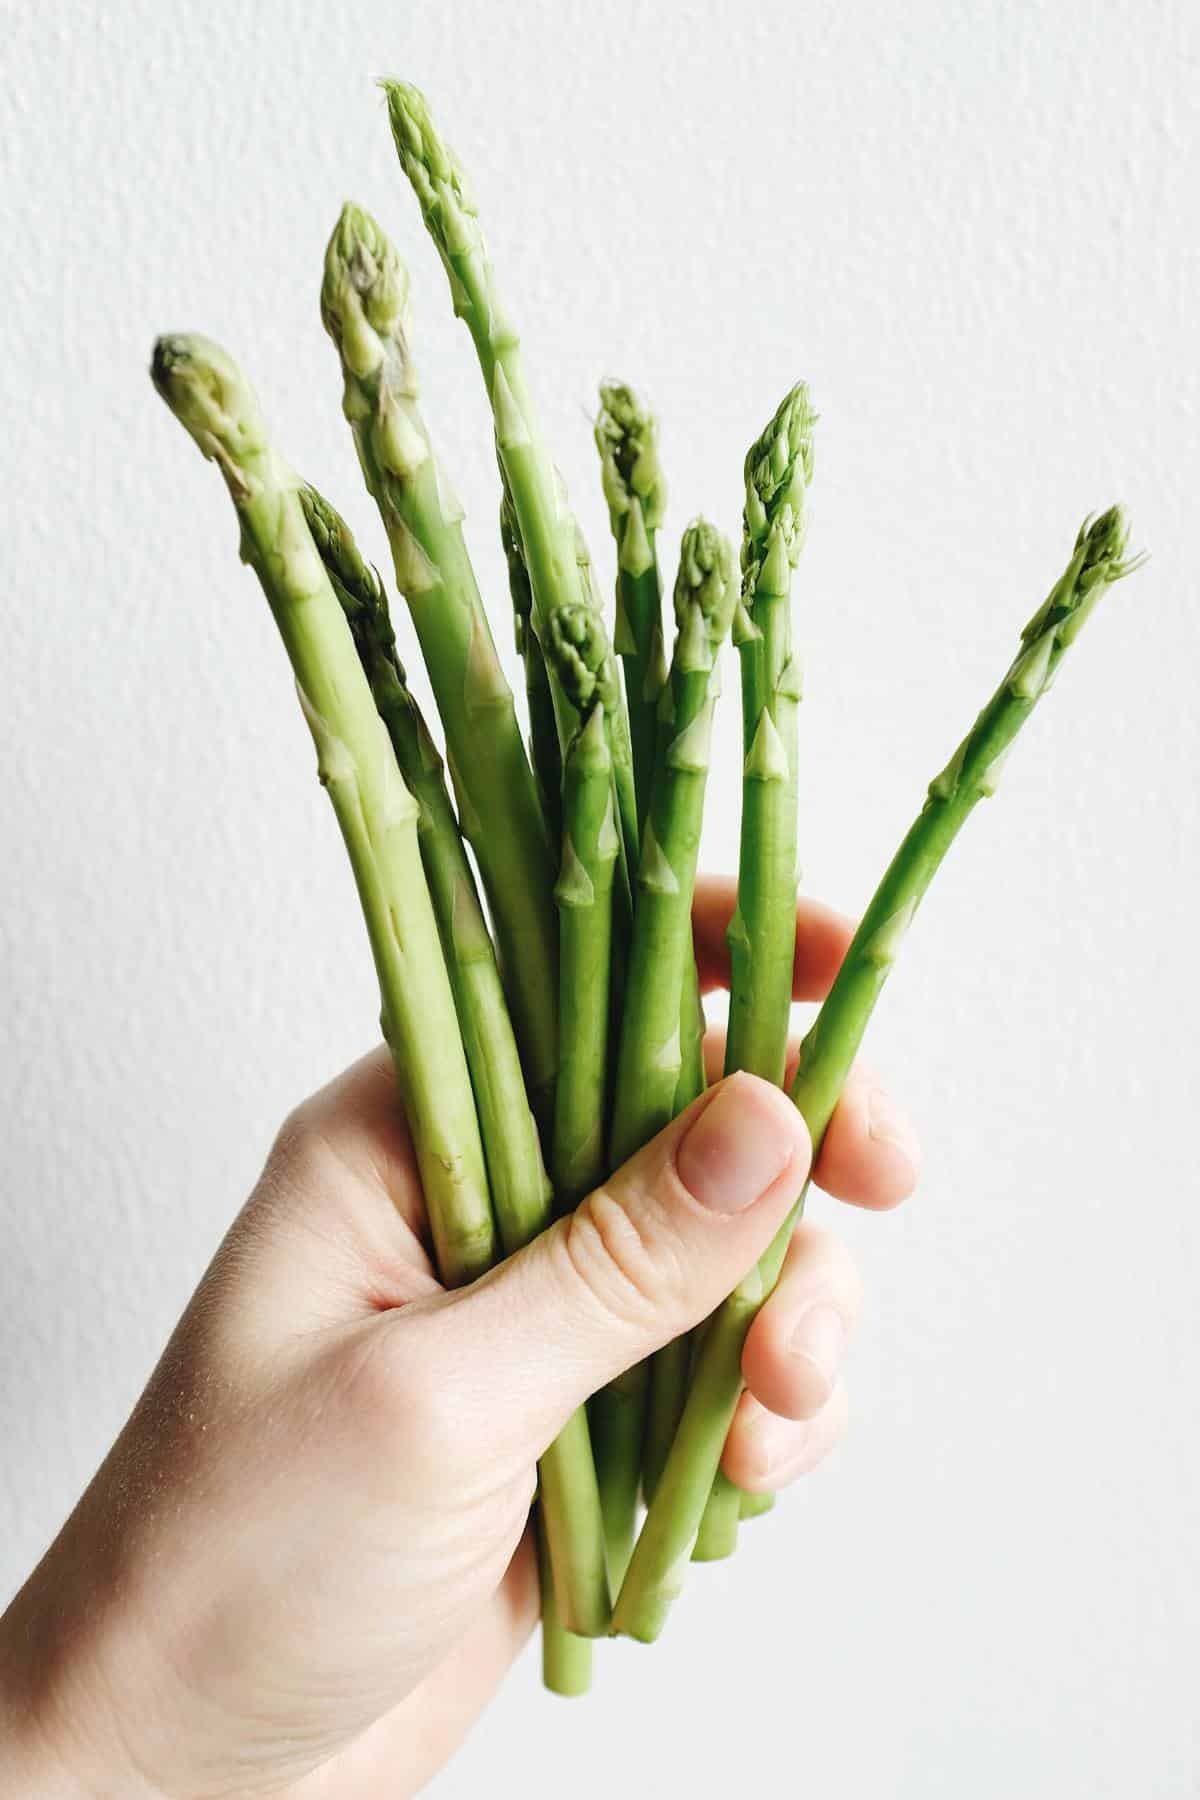 Hand holding a bunch of asparagus.